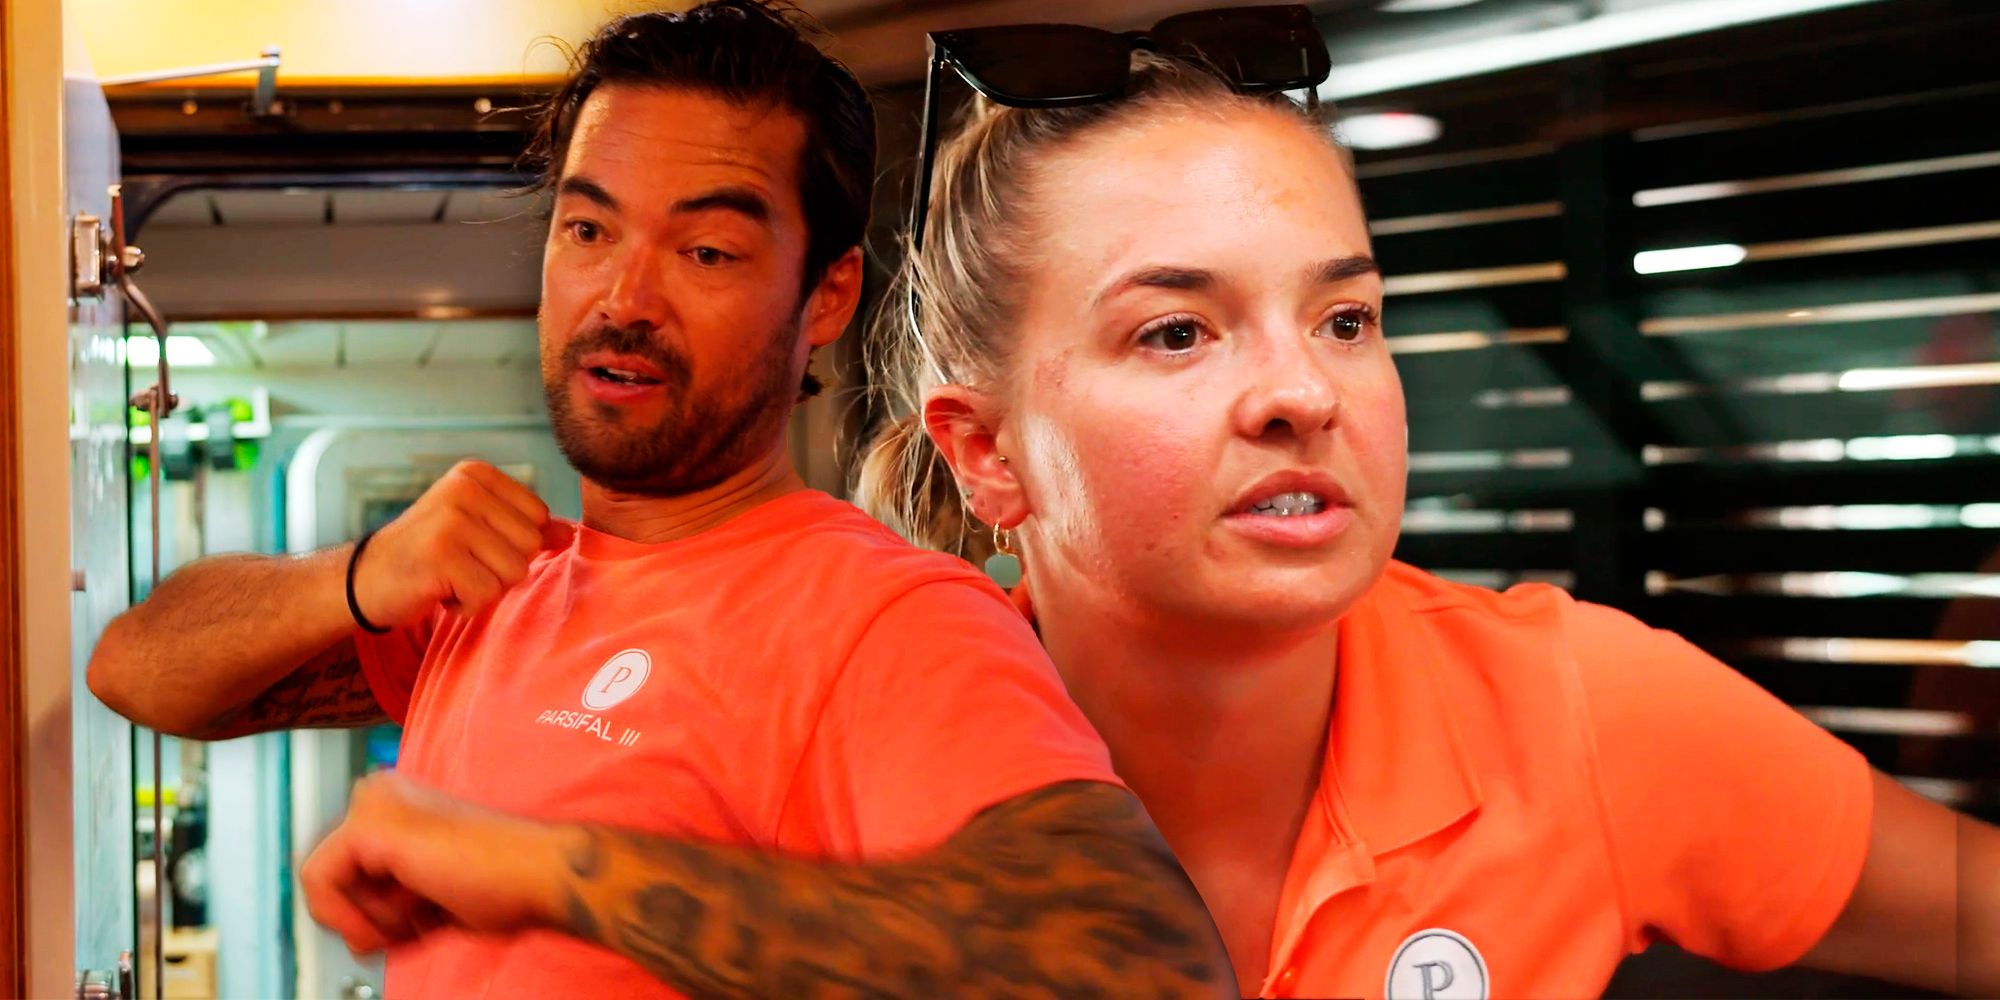 Below Deck's Daisy Kelliher and Colin MacRae in orange uniforms montage with yacht interior background